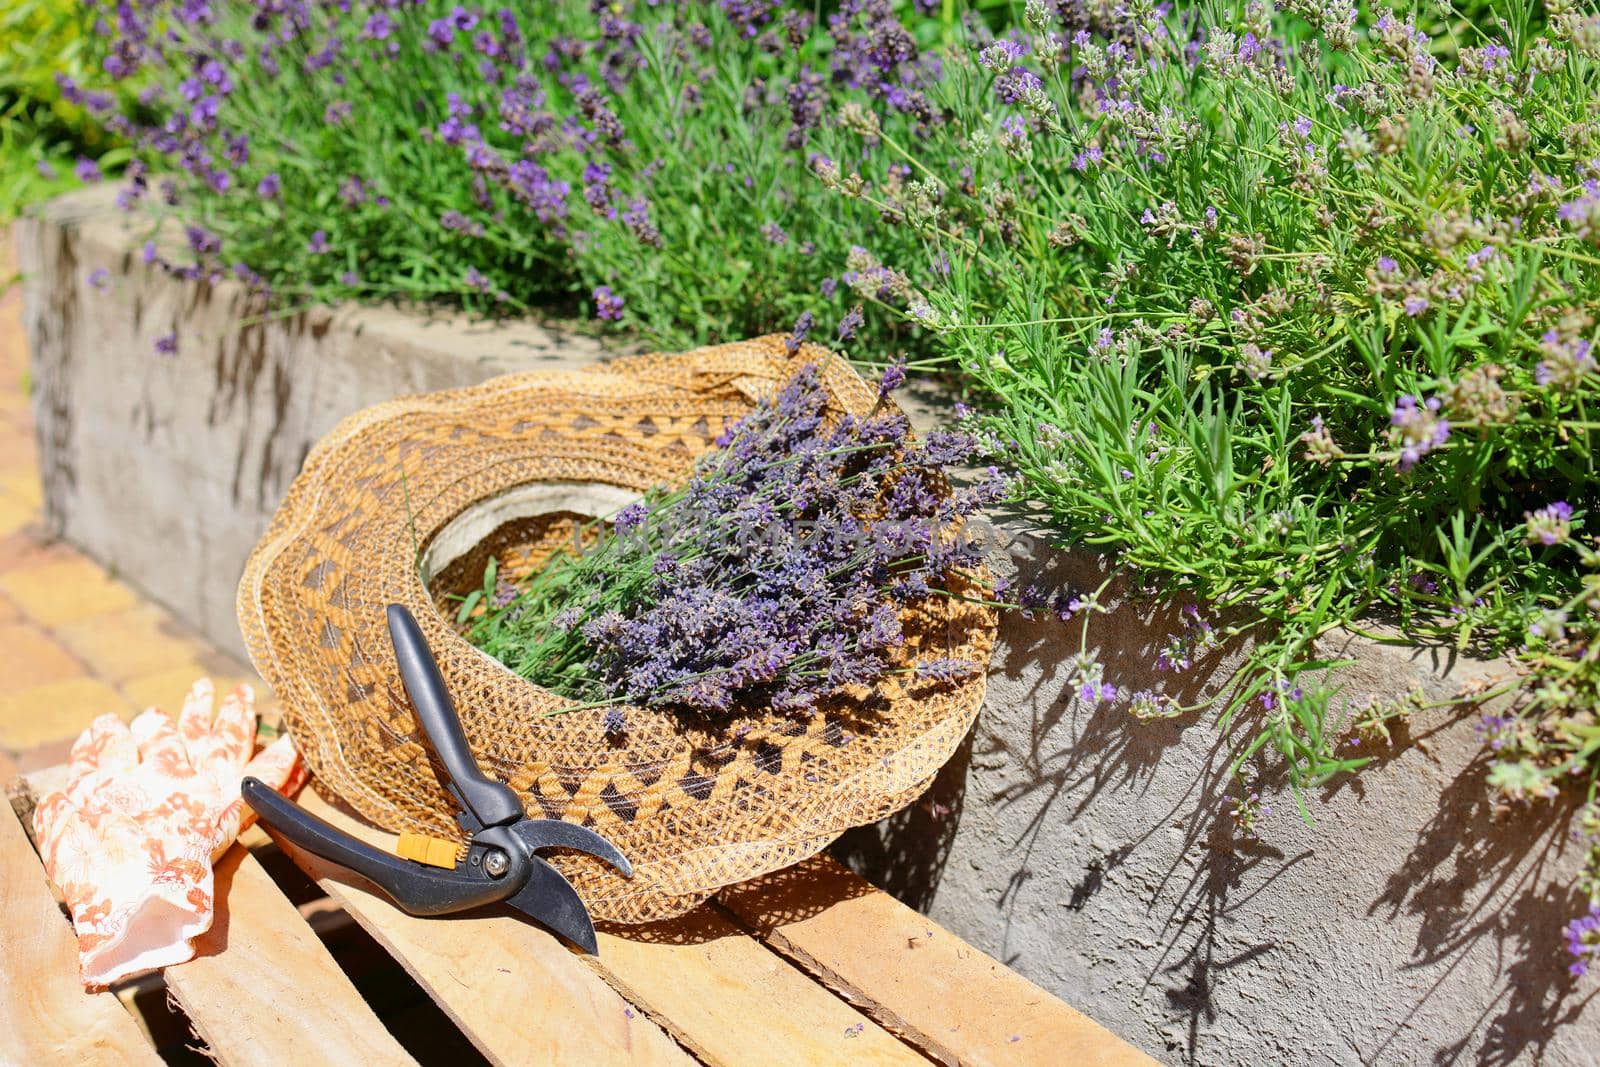 Harvesting lavender.Cut dry lavender flowers and a garden pruner in a hat on a wooden box next to blooming lavender bushes. Summer.